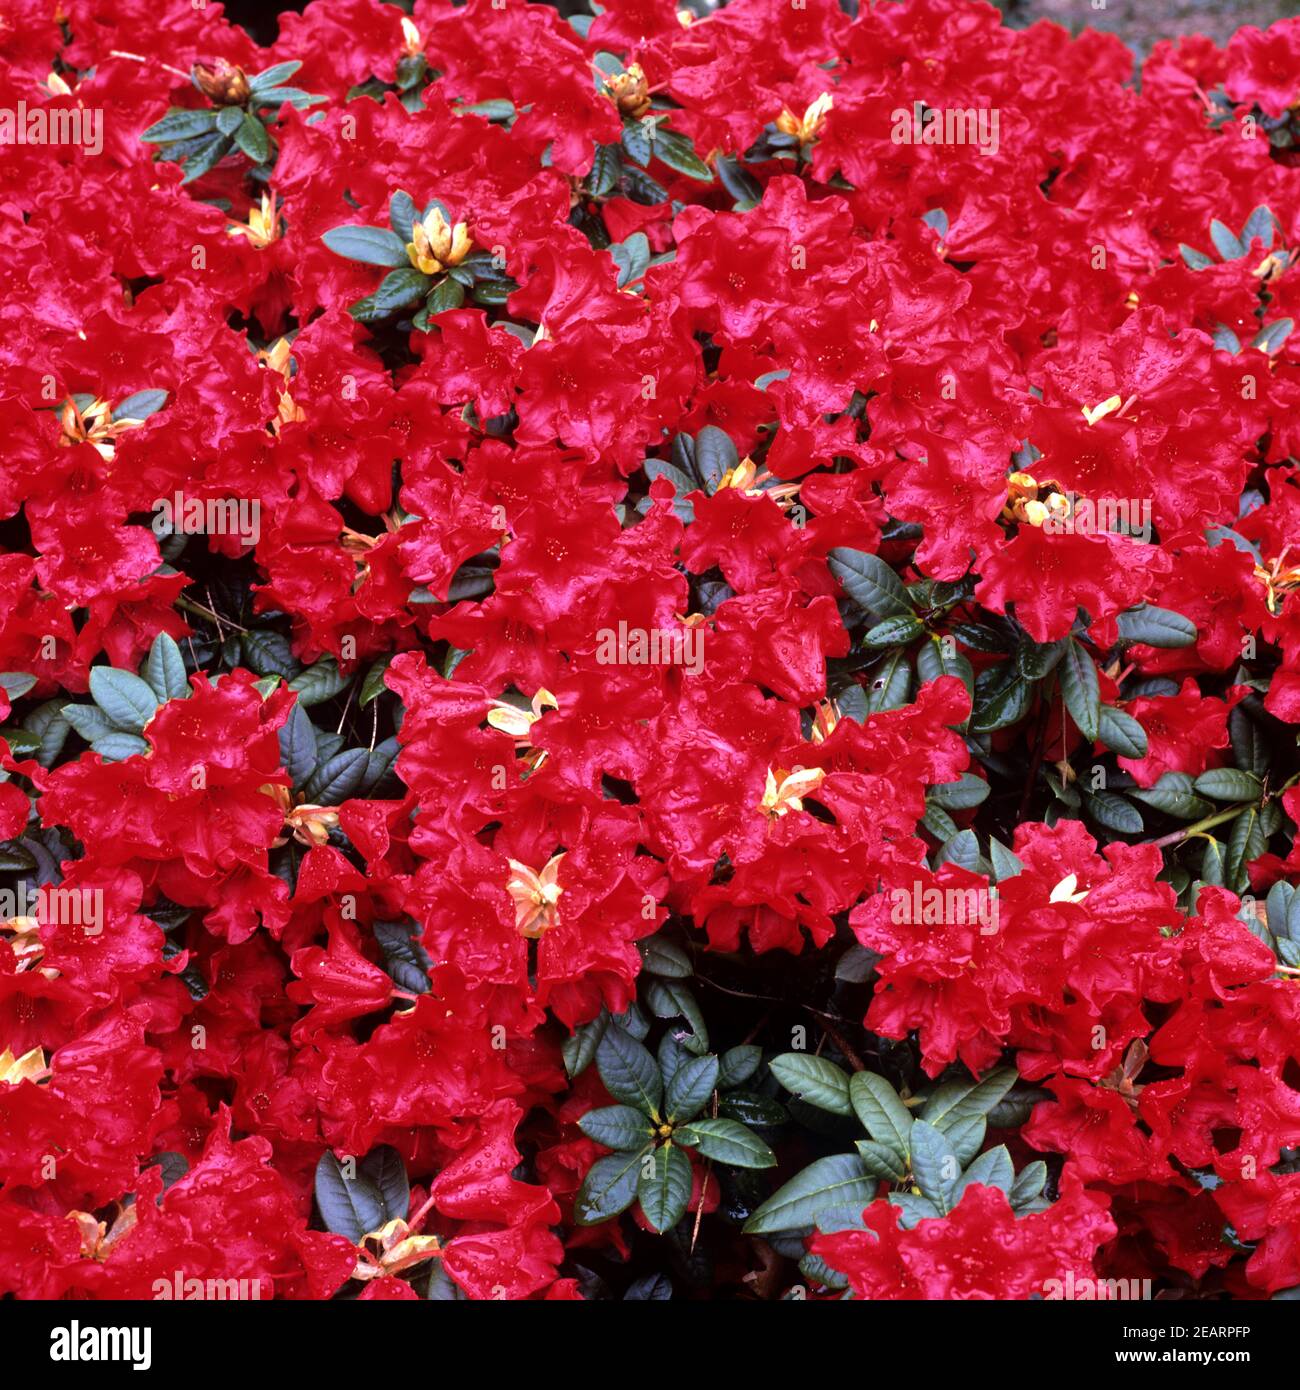 Rhododendron, Repens, Fruehlingsanfang Stock Photo